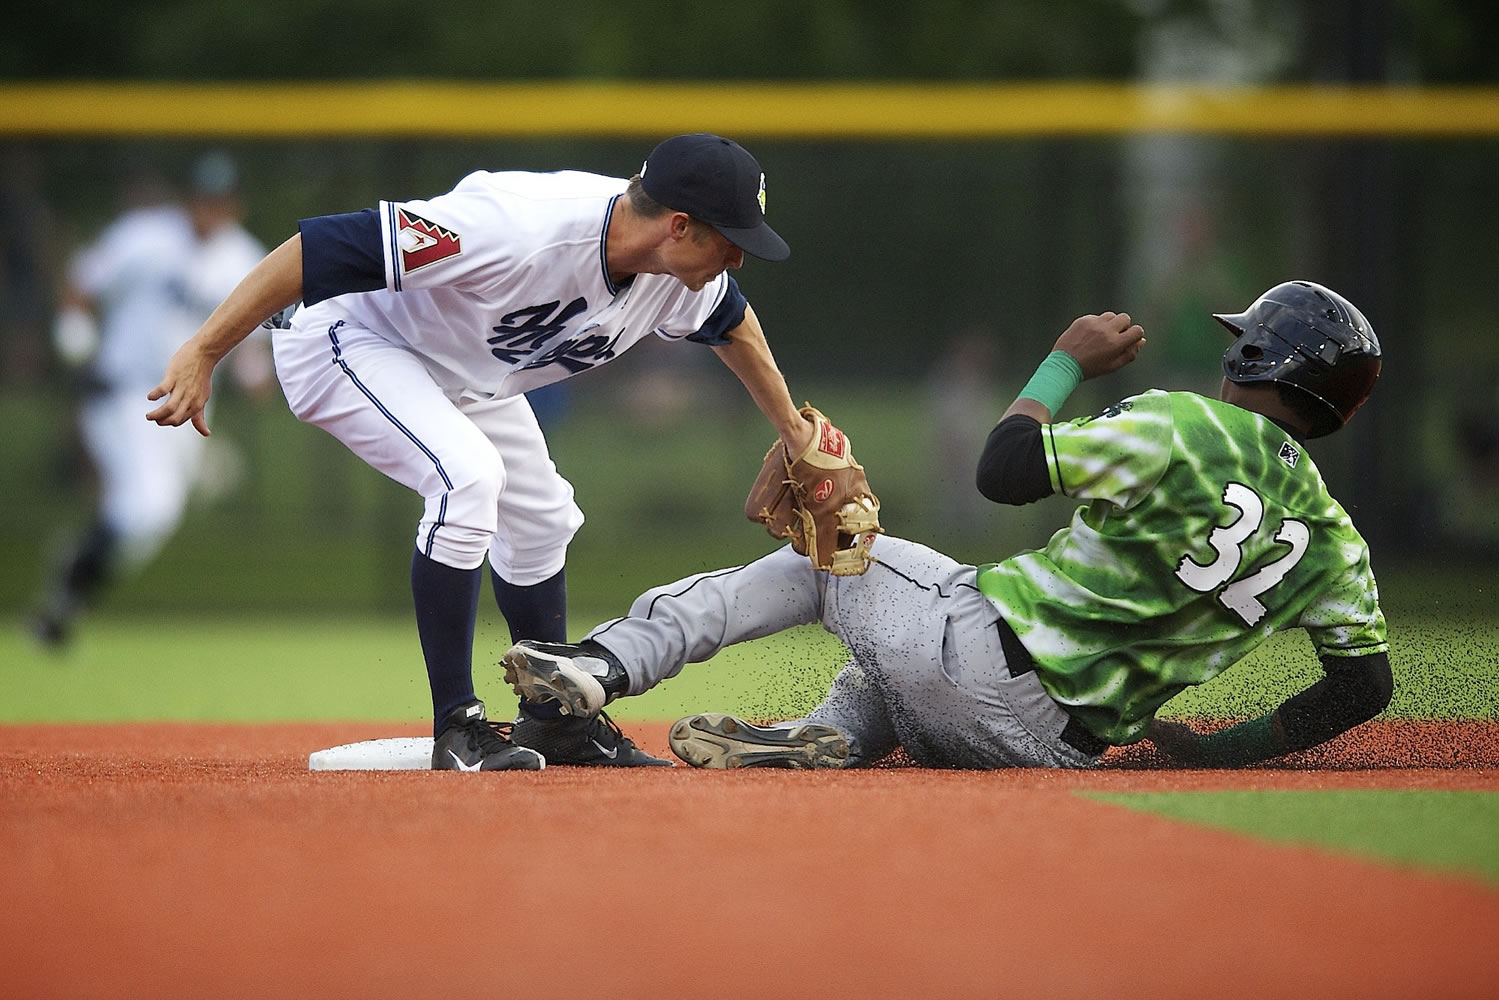 Josh Parr, left, of the Hillsboro Hops tags out Henry Charles of the Eugene Emeralds at second base in the bottom of the third inning Monday at the new Hillsboro Ballpark.